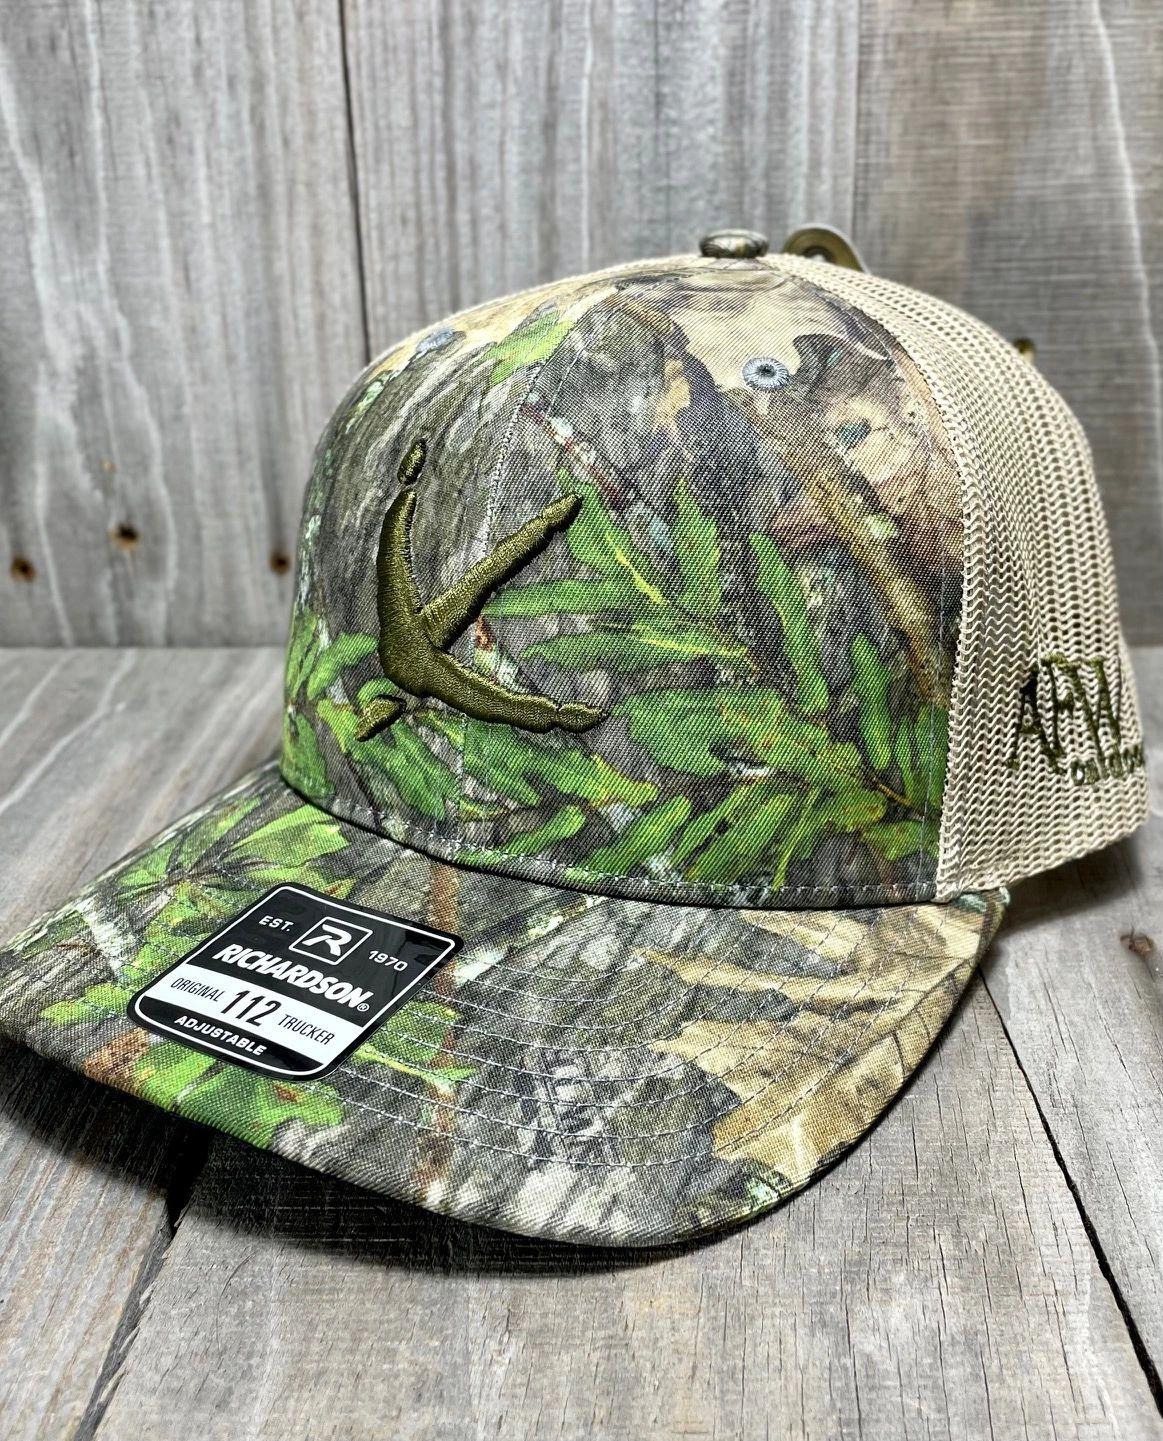 Mossy Oak Obsession First Gen Camouflage